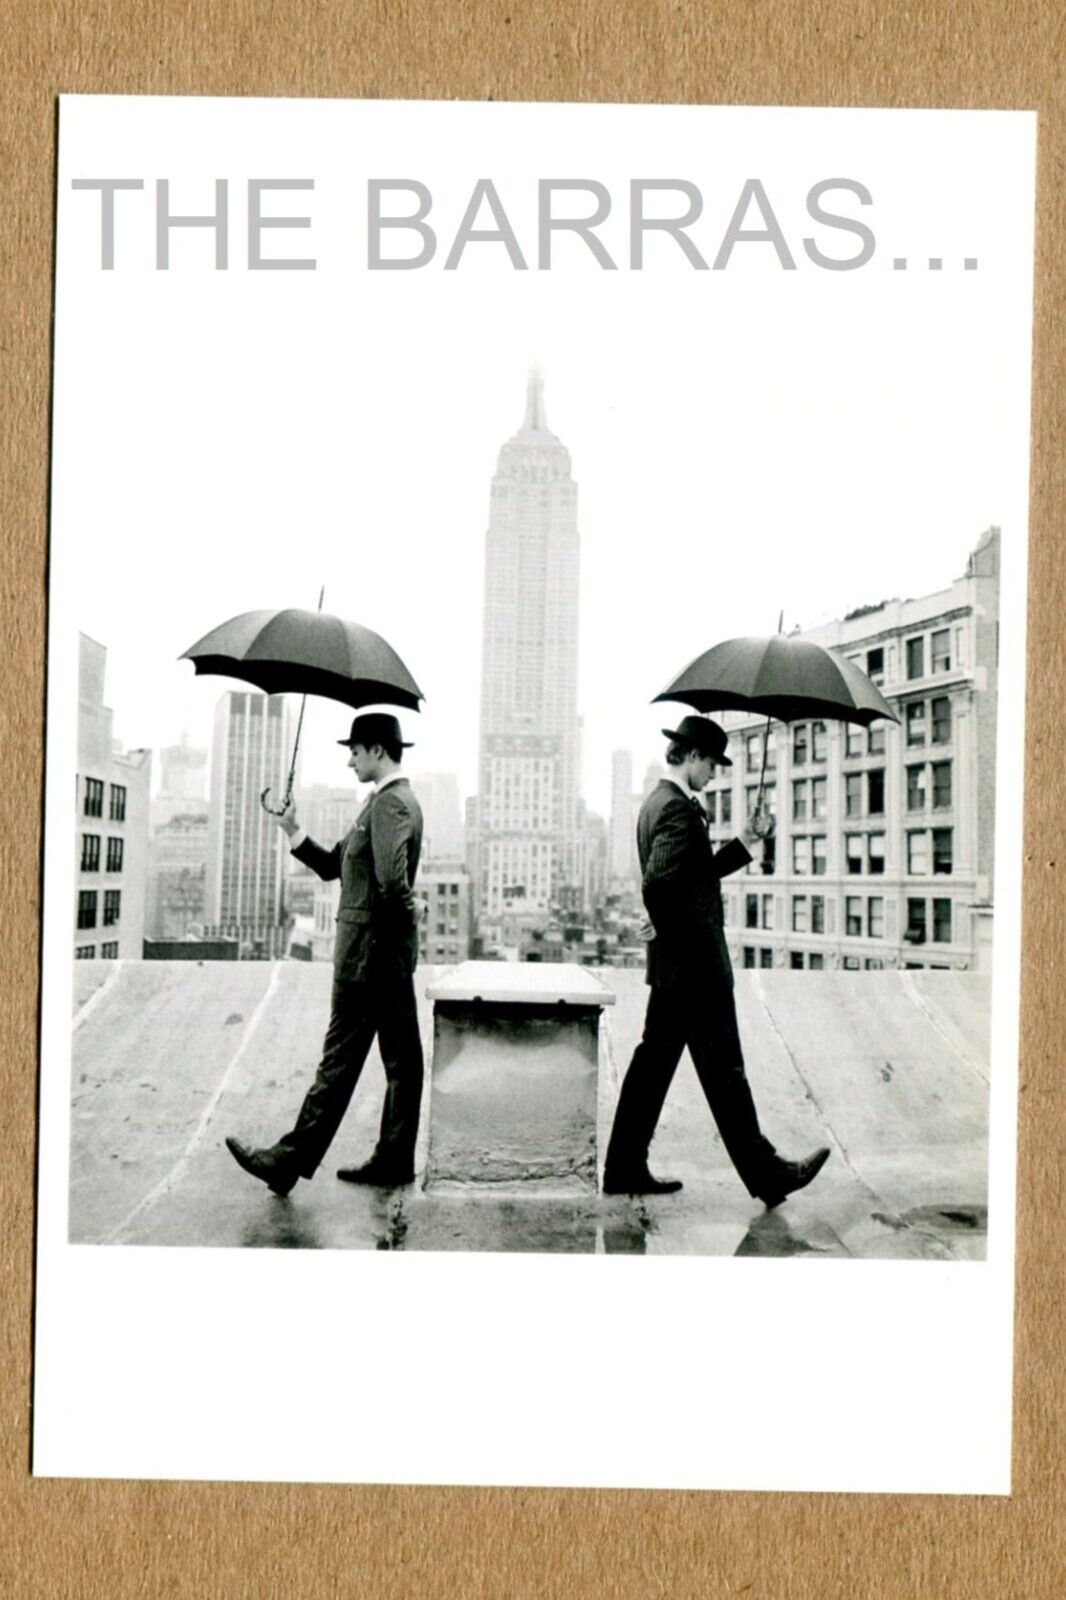 RODNEY SMITH, Reed & Nathan with Umbrellas on Rooftop, NEW YORK. 2011 POSTCARD